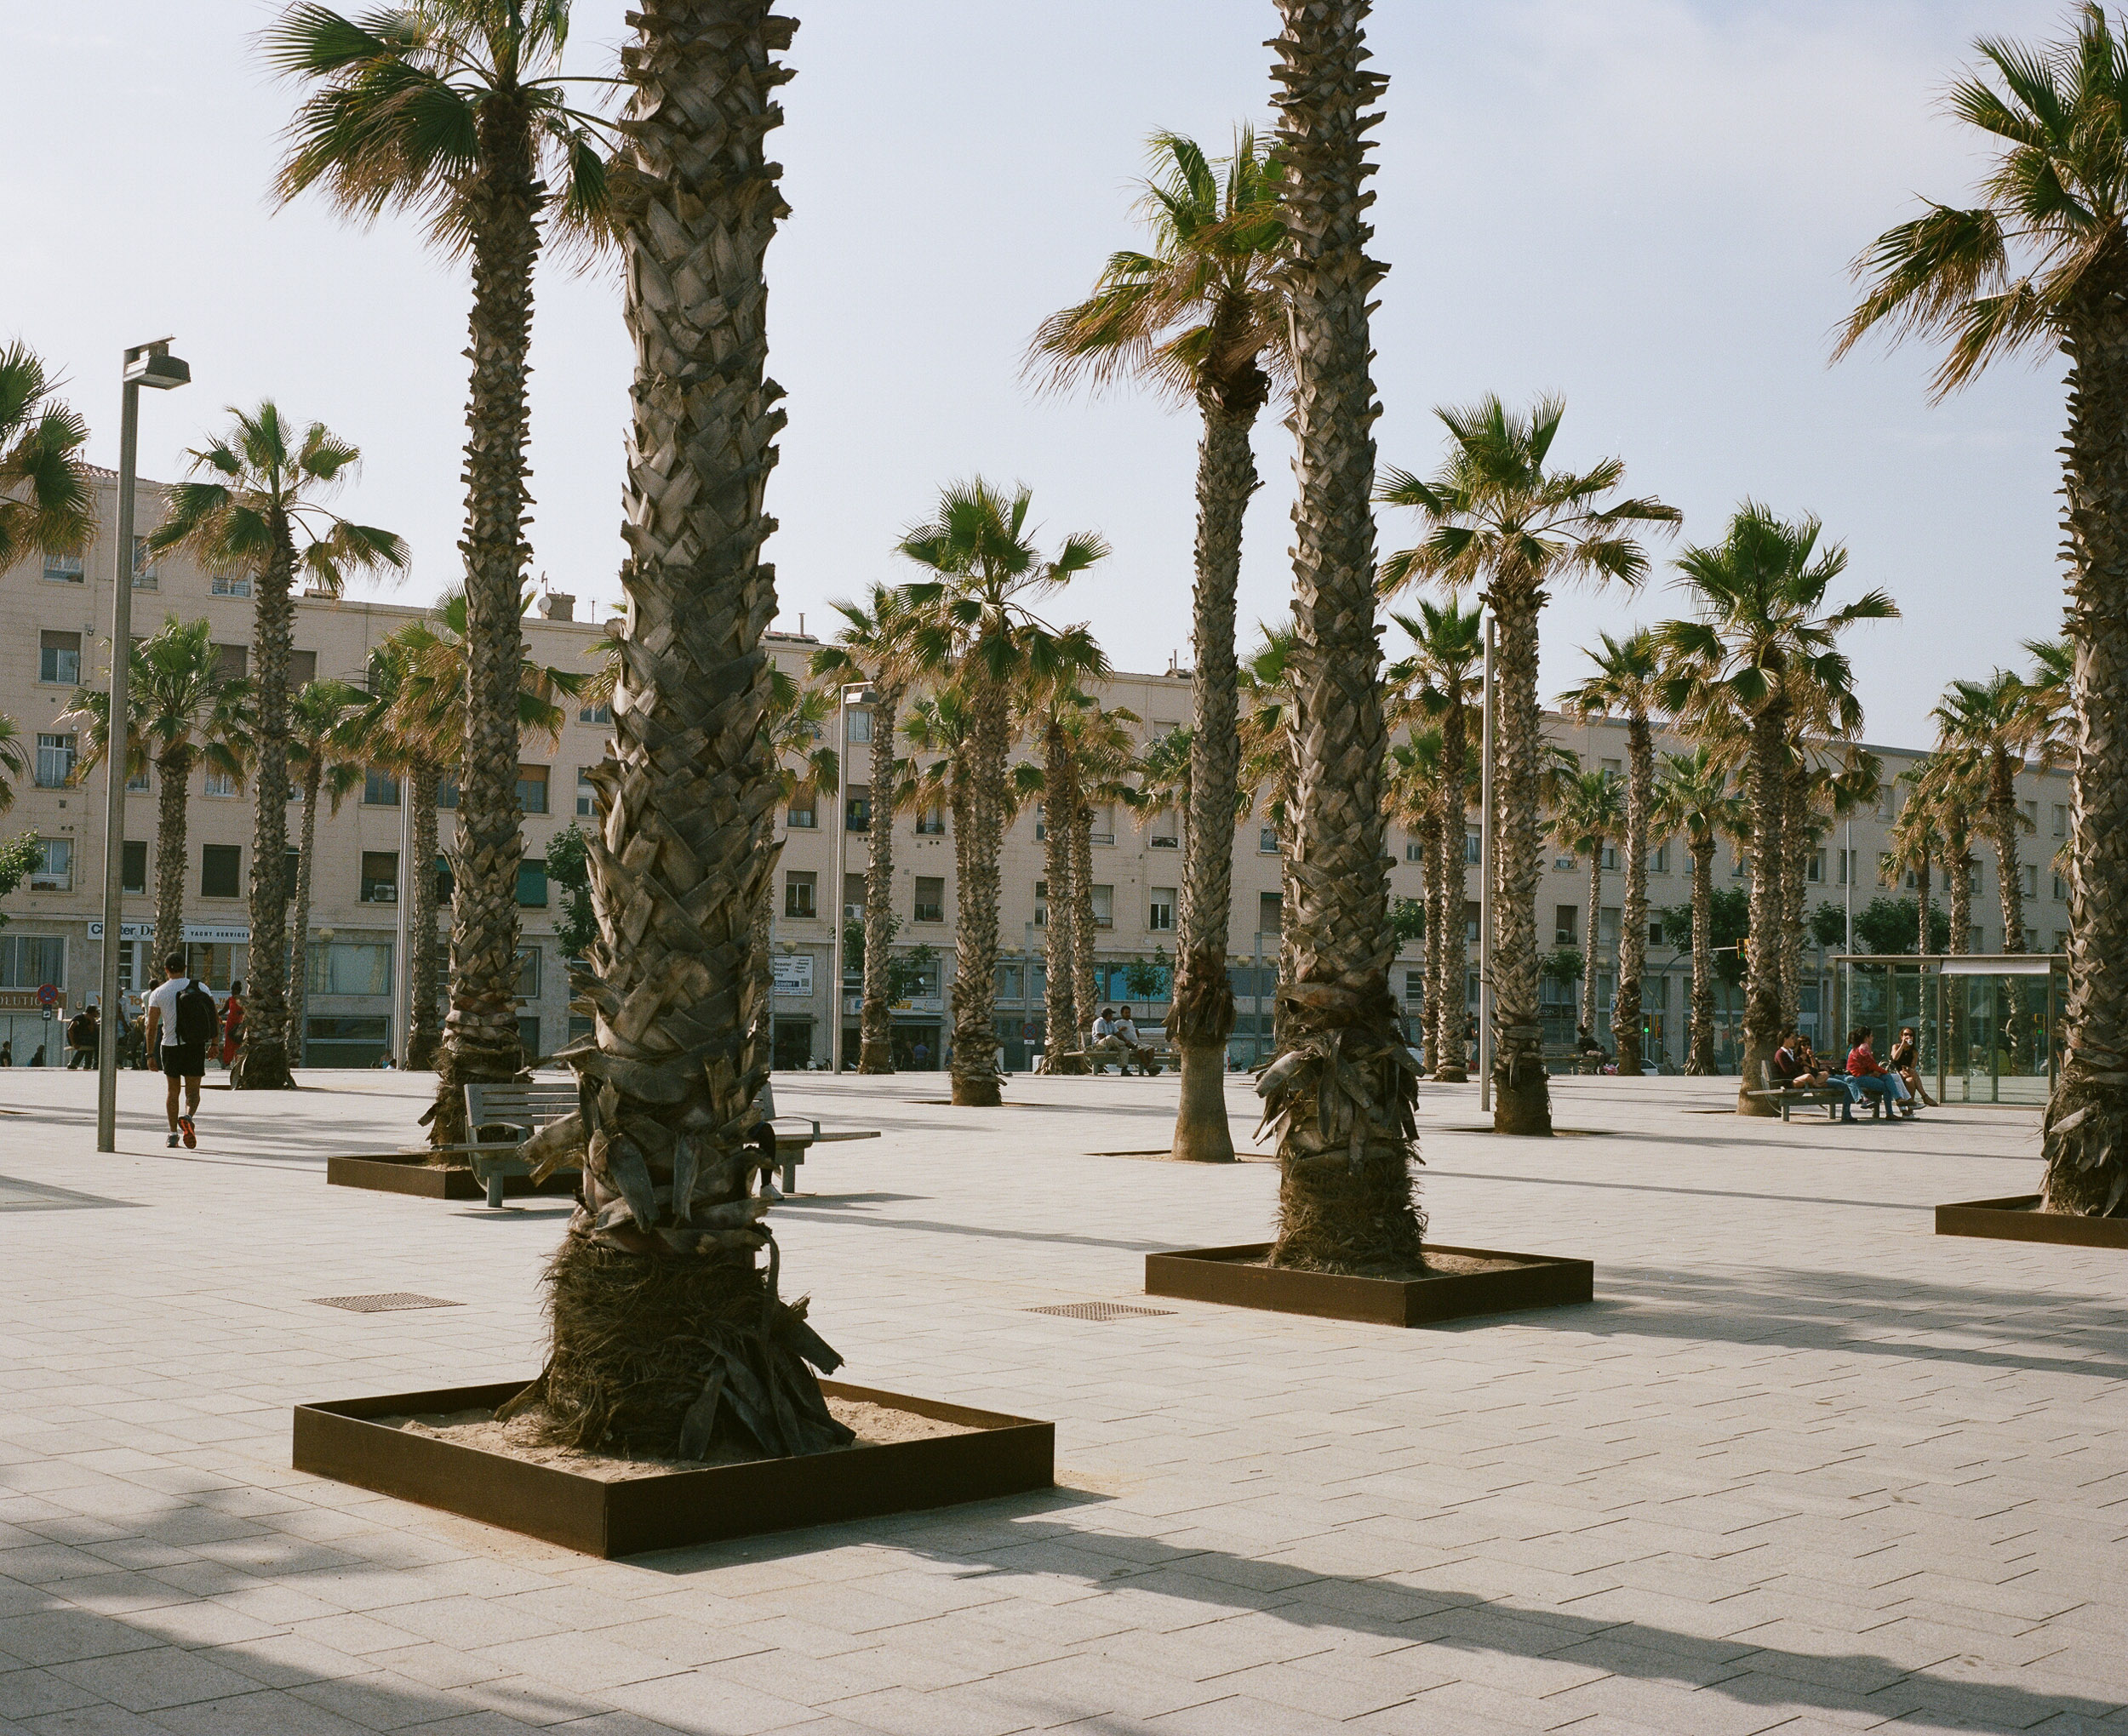 Palm trees in planters in Barcelona, Spain in front of a building